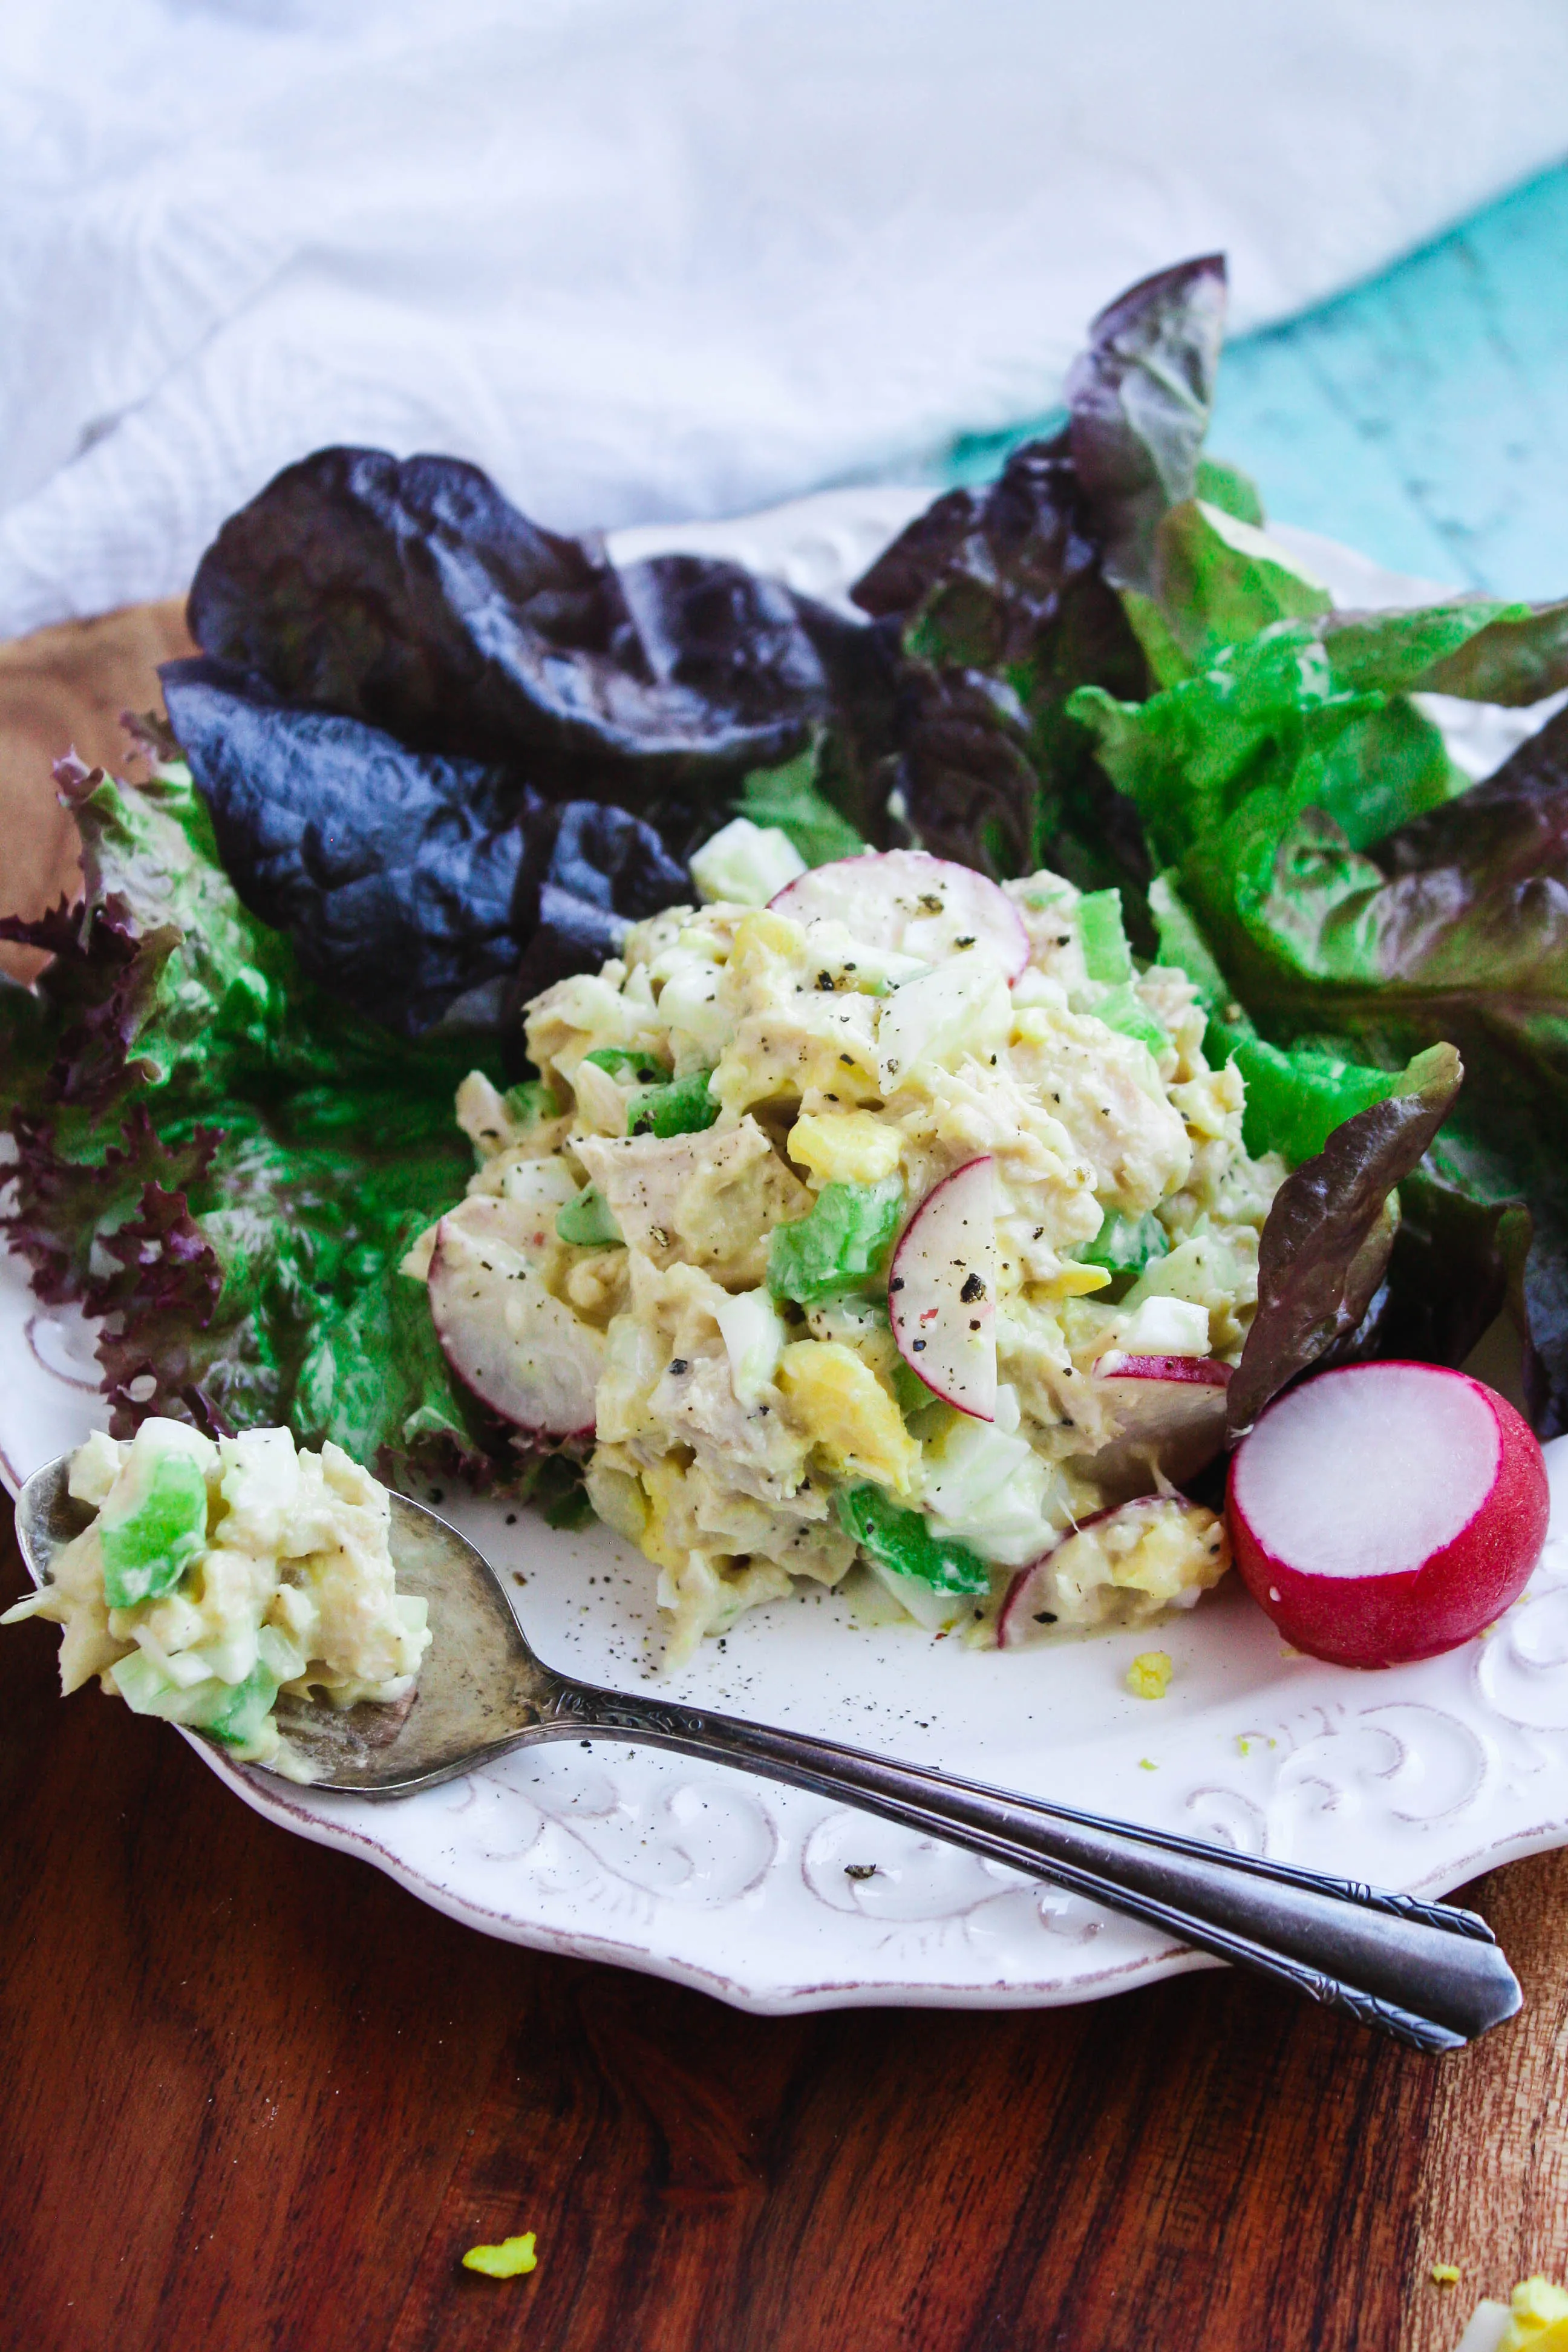 Tuna Salad with Egg is a fabulous sandwich spread. Tuna Salad with Egg is great with your favorite lettuce greens, too.